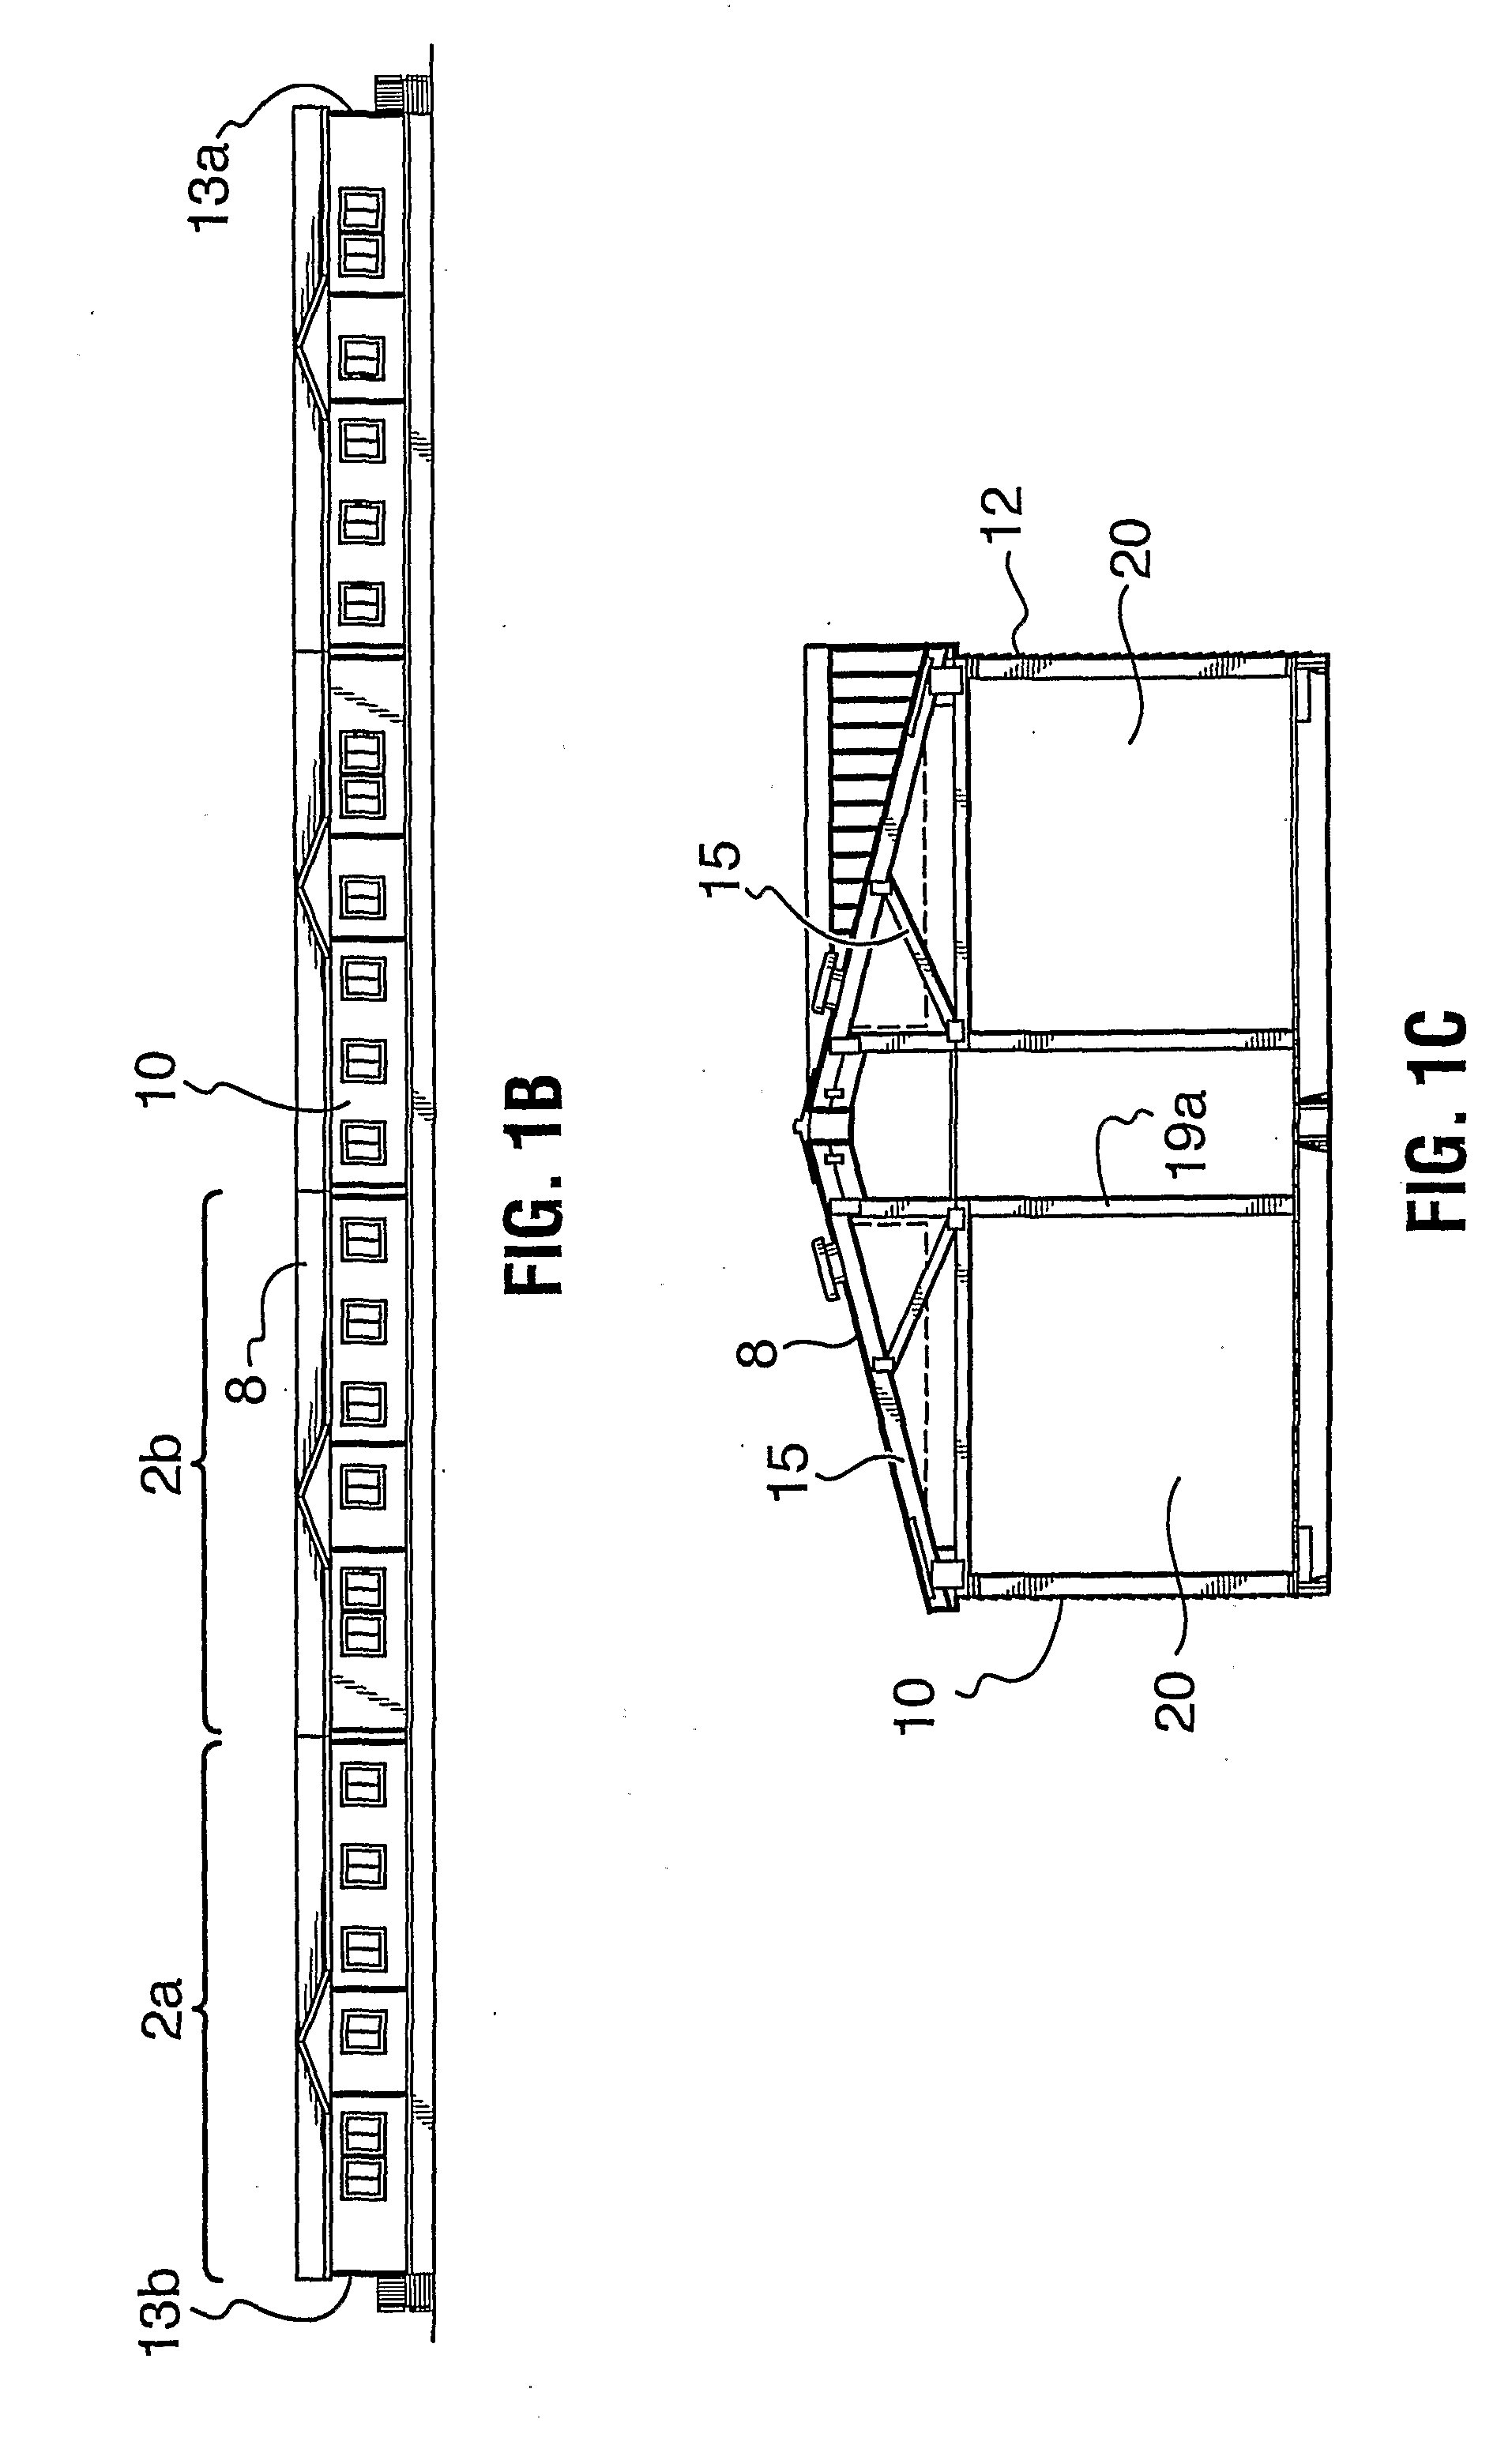 Reusable worker housing and methods relating thereto